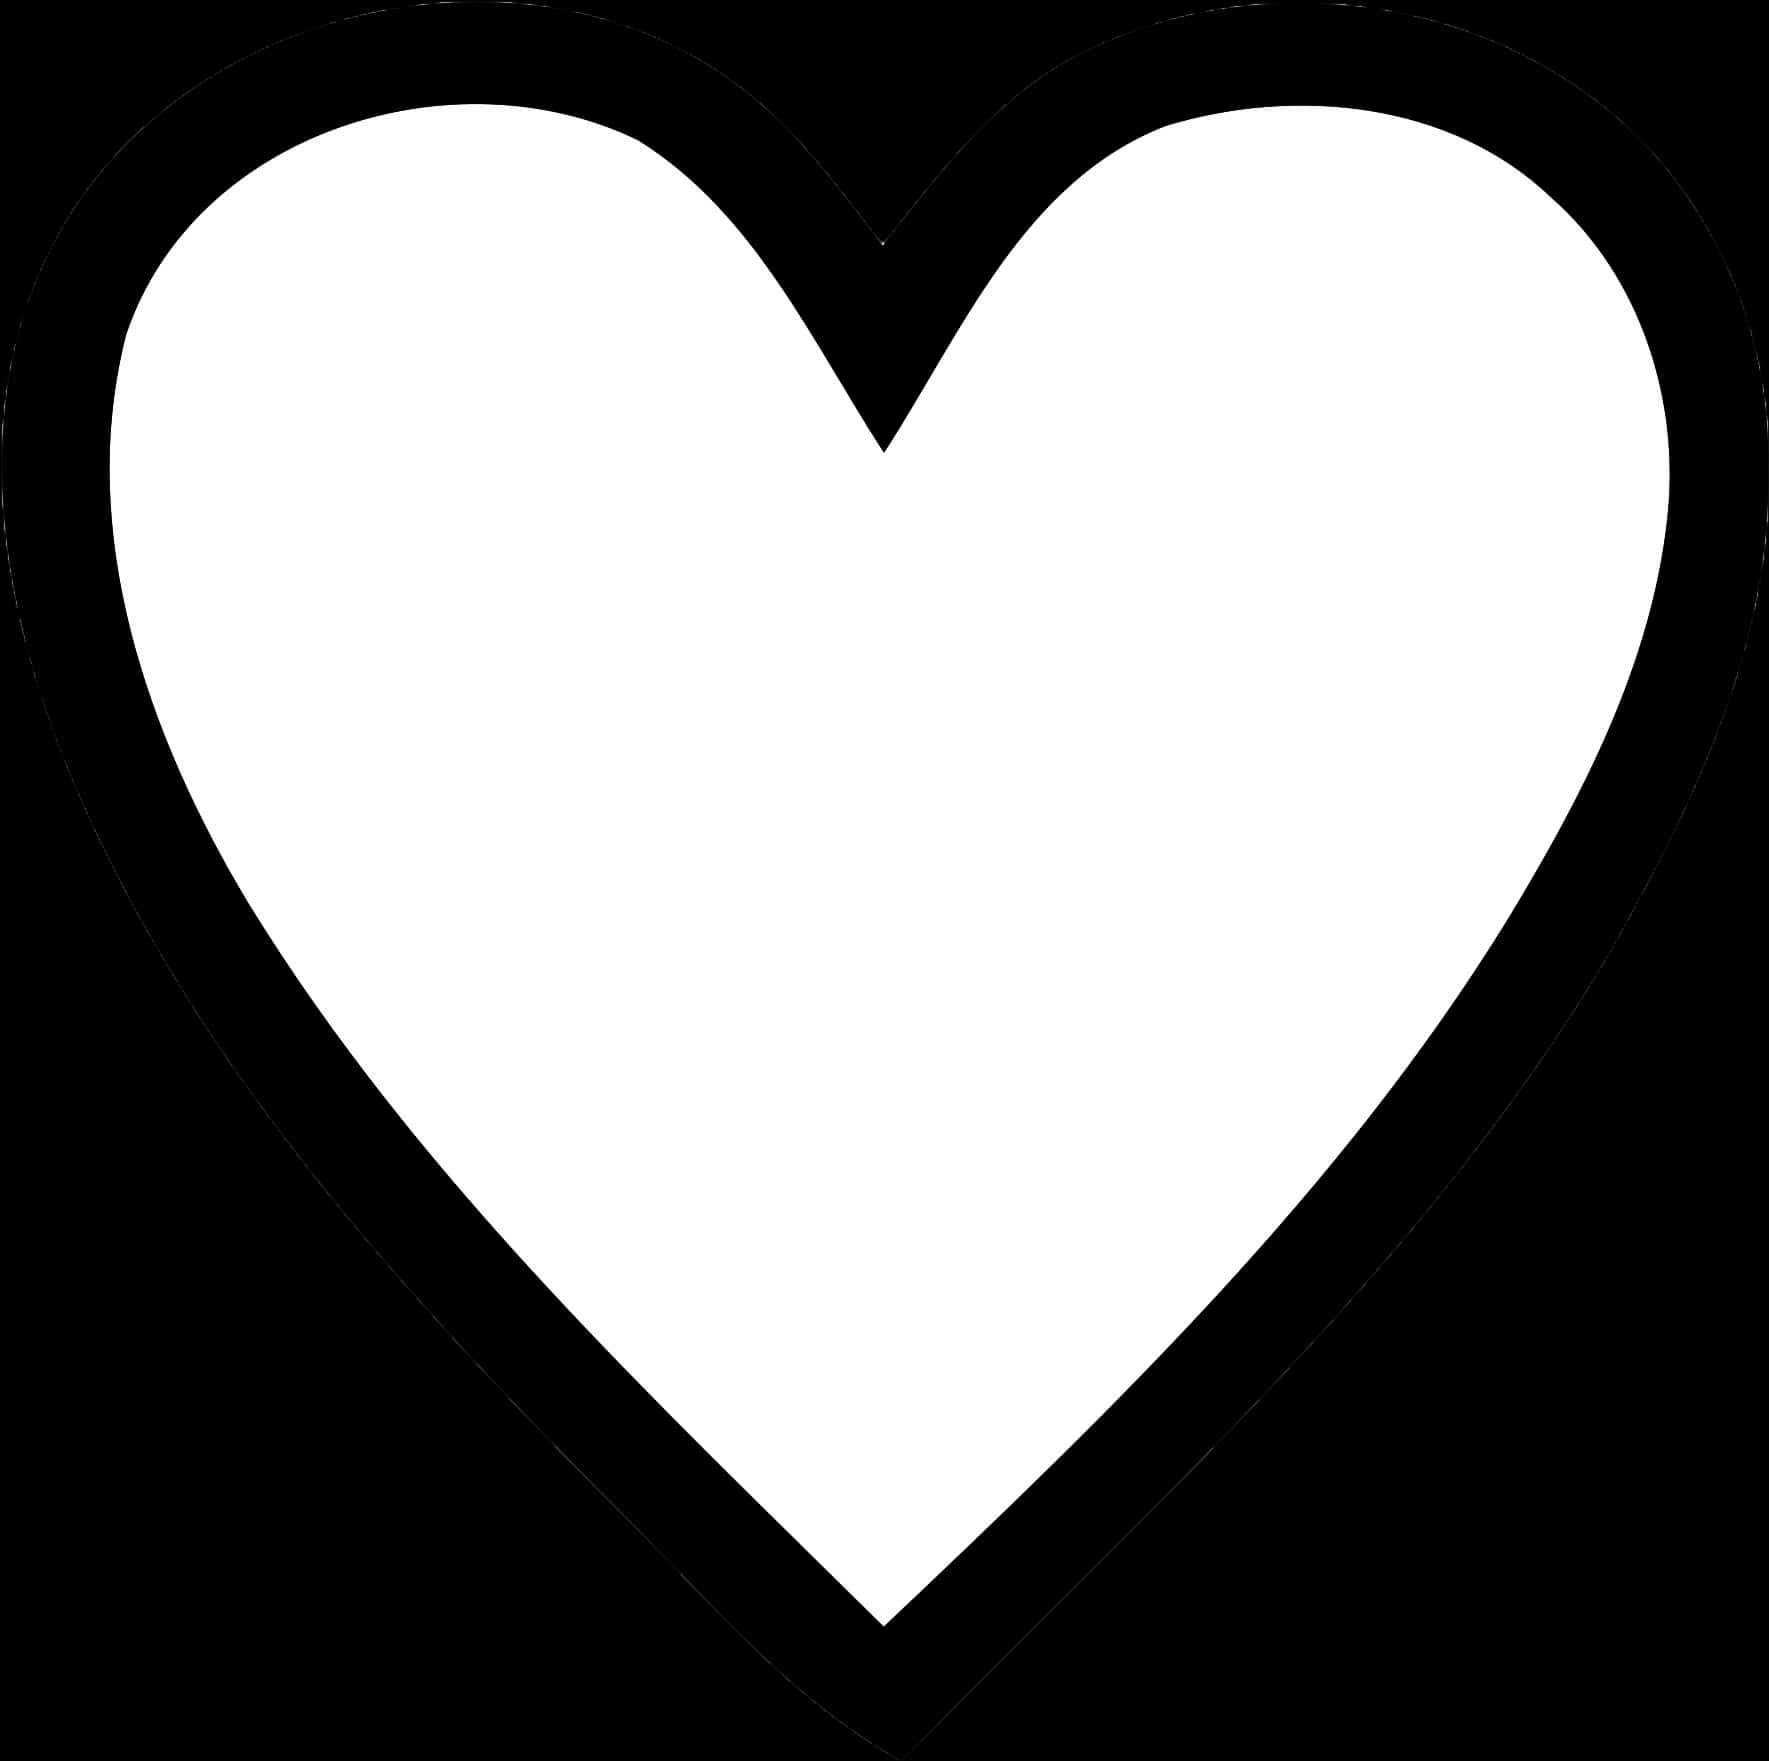 Blackand White Heart Graphic PNG